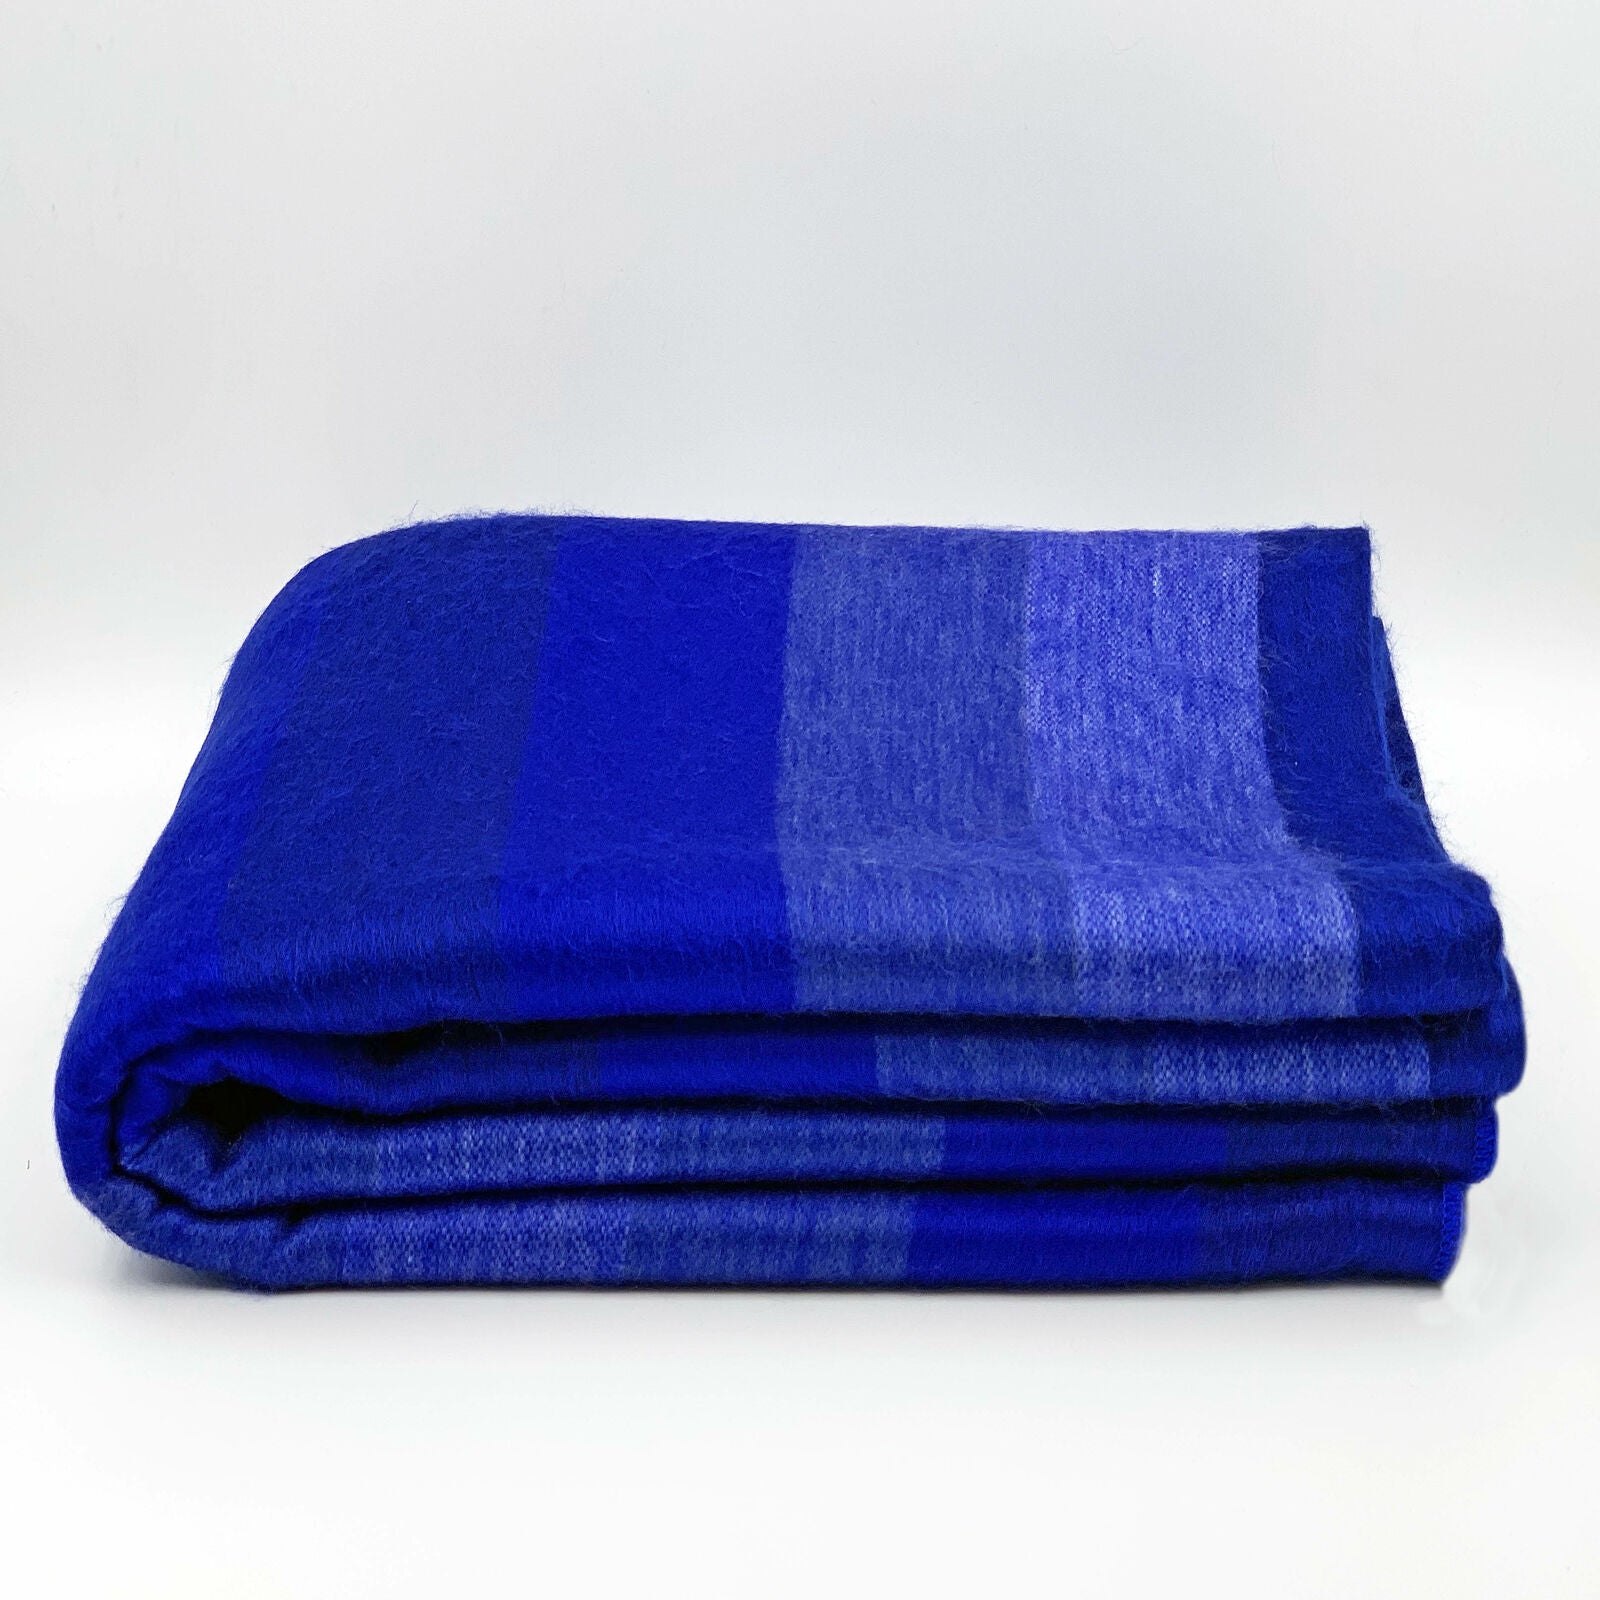 Chibuleo - Baby Alpaca Wool Throw Blanket / Sofa Cover - Queen 90" x 65" - thick stripes pattern navy blue